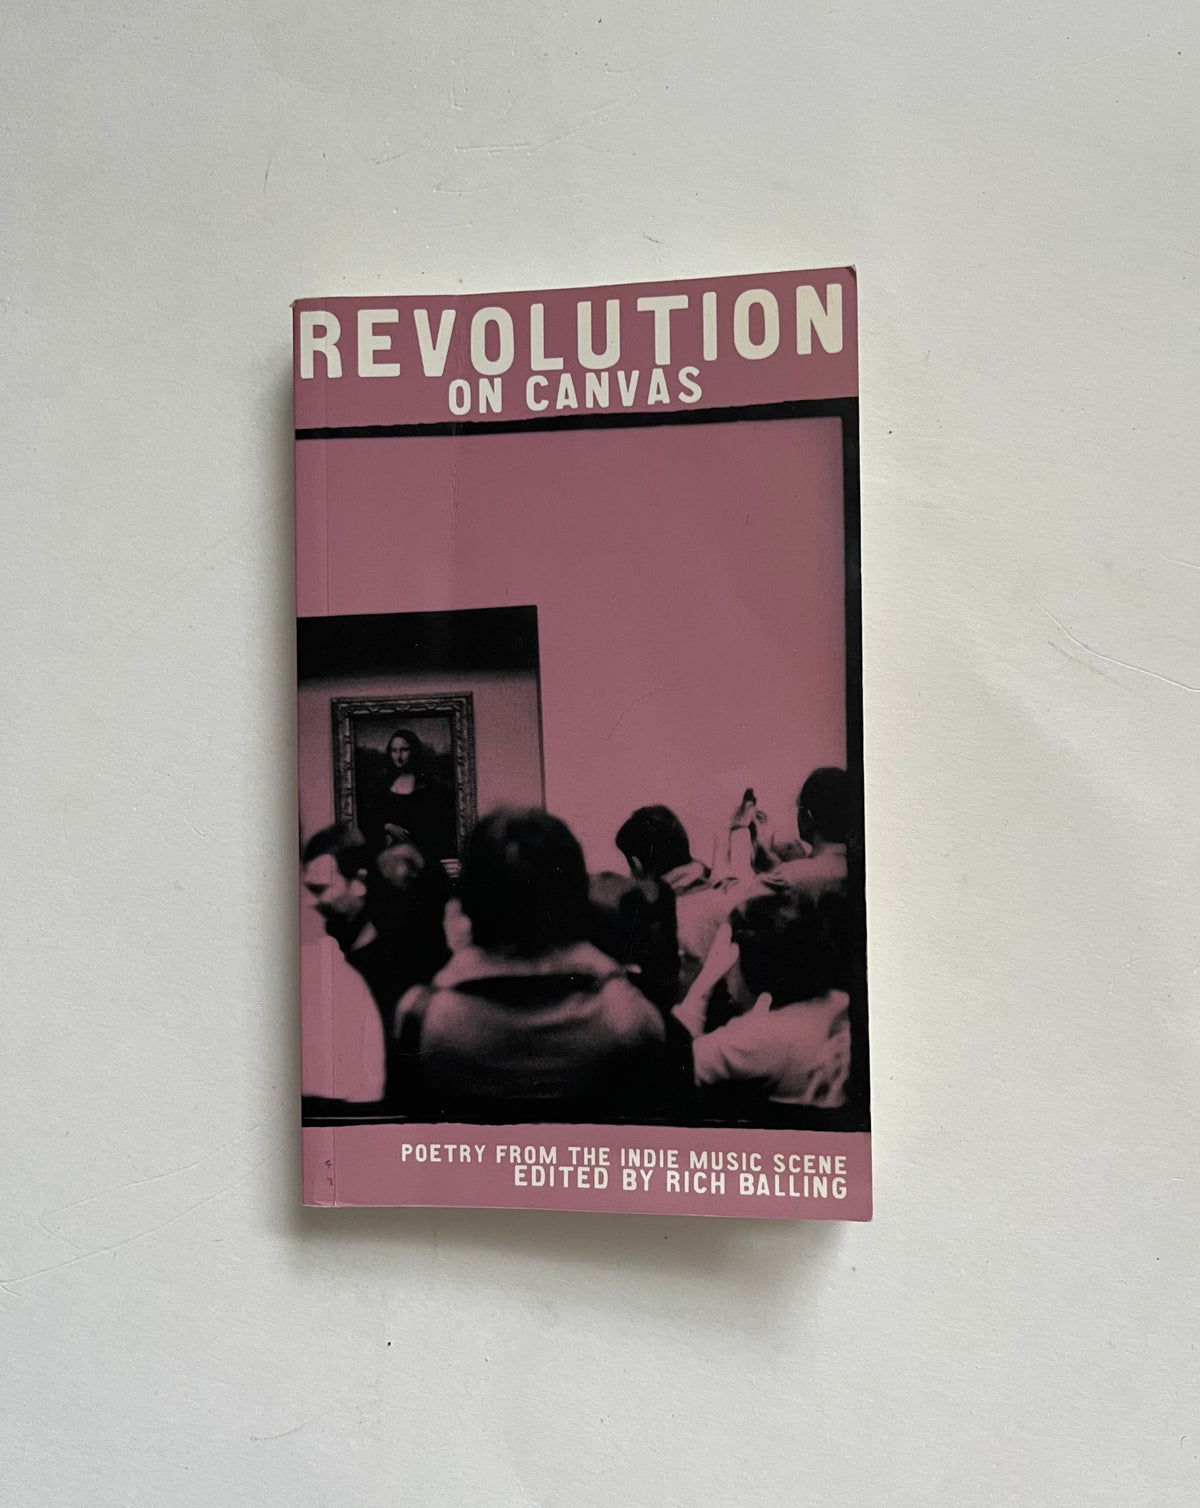 Revolution on Canvas: Poetry from the Indie Music Scene edited by Rich Balling